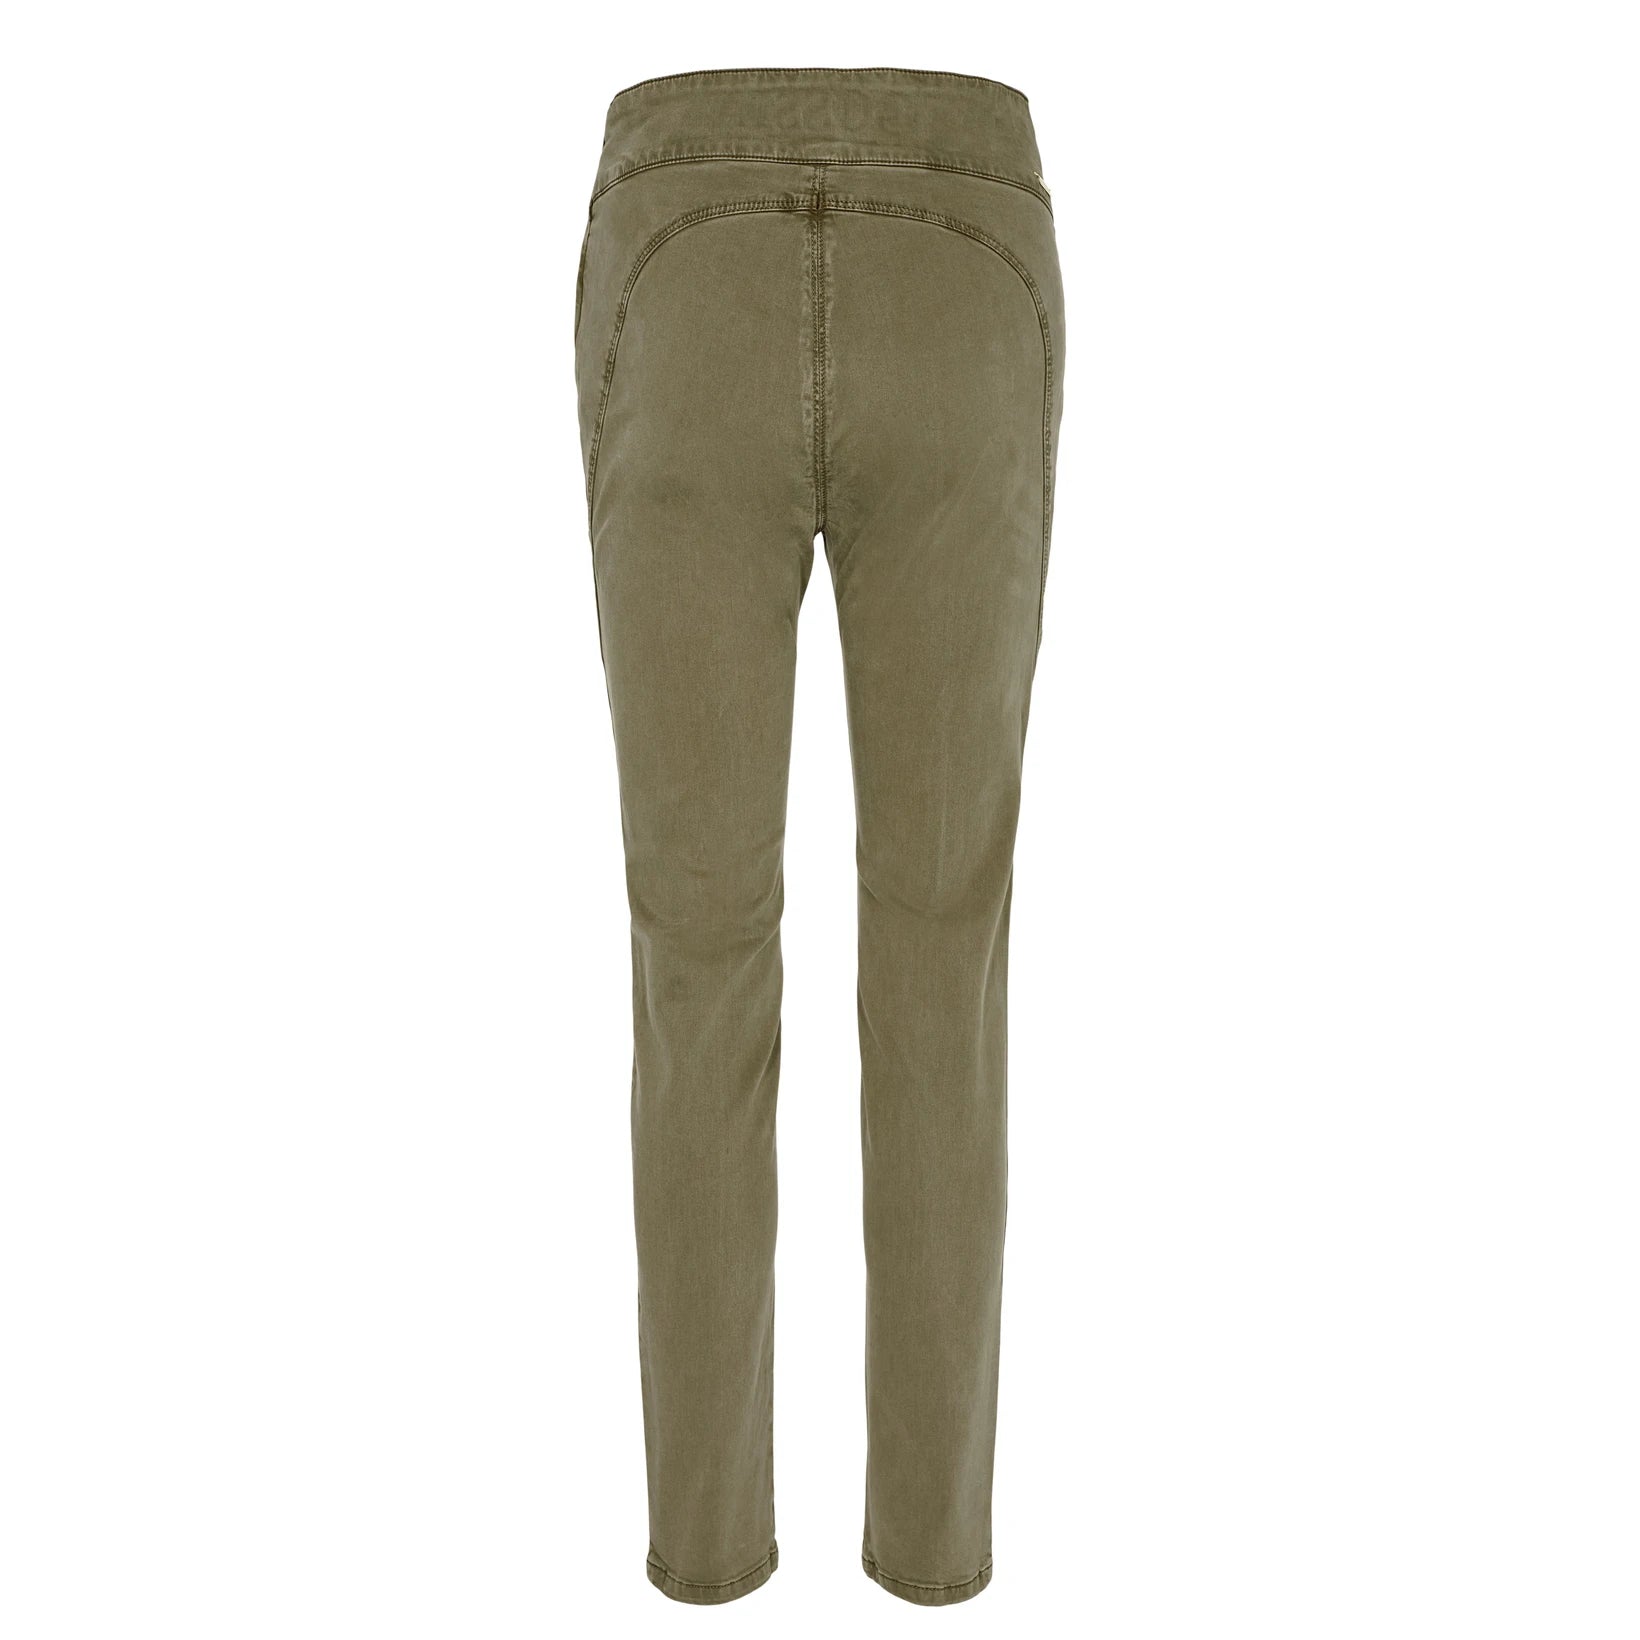 Lucia Pant, Army, Bukser fra Gossia